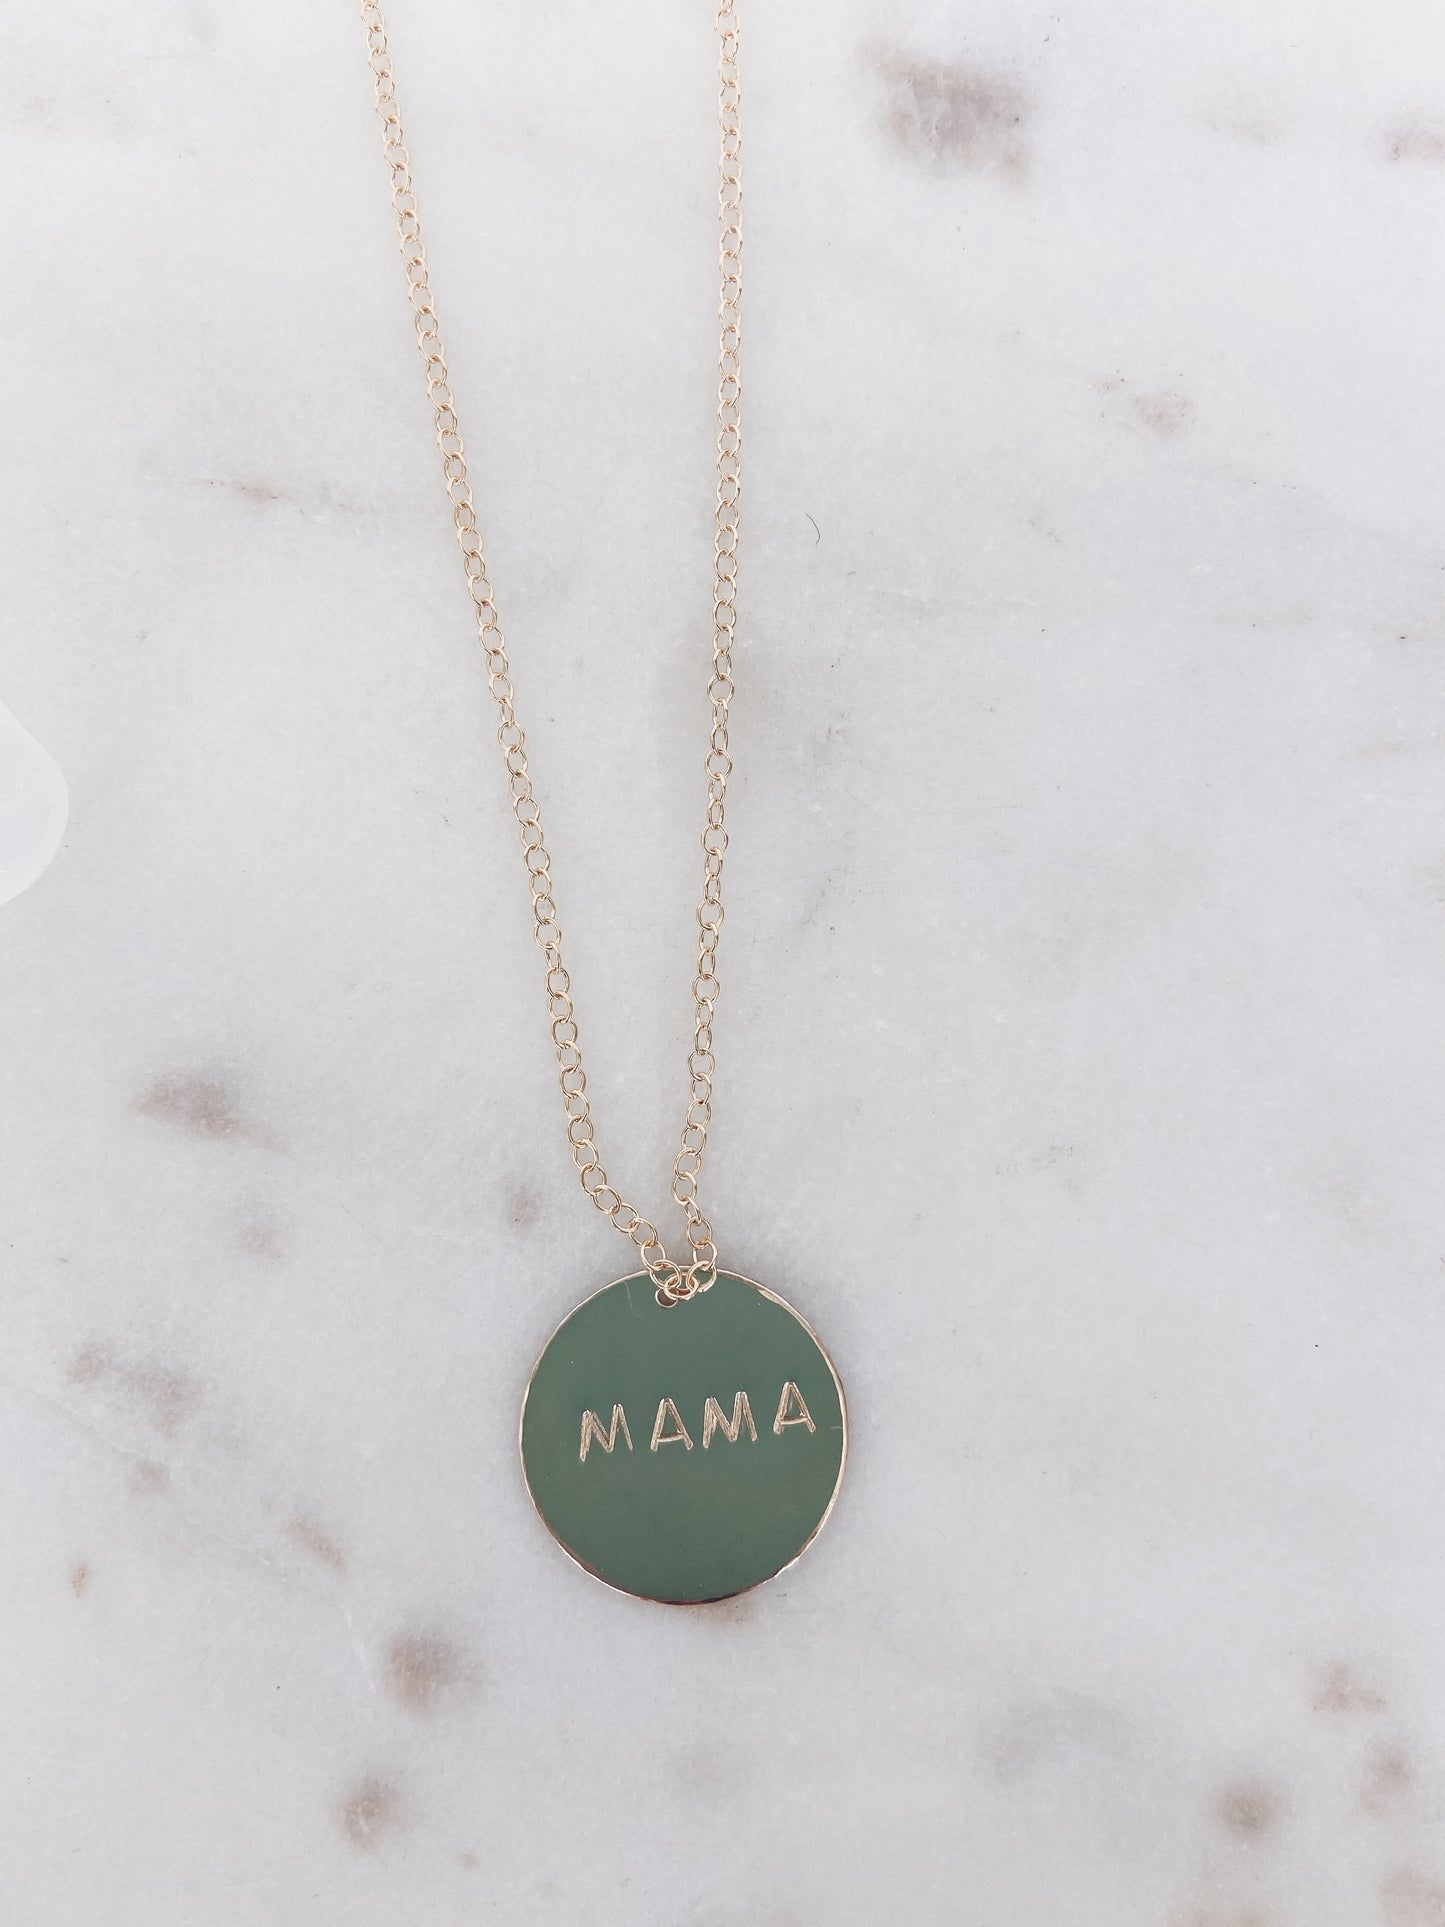 Who’s Your Mama Necklace